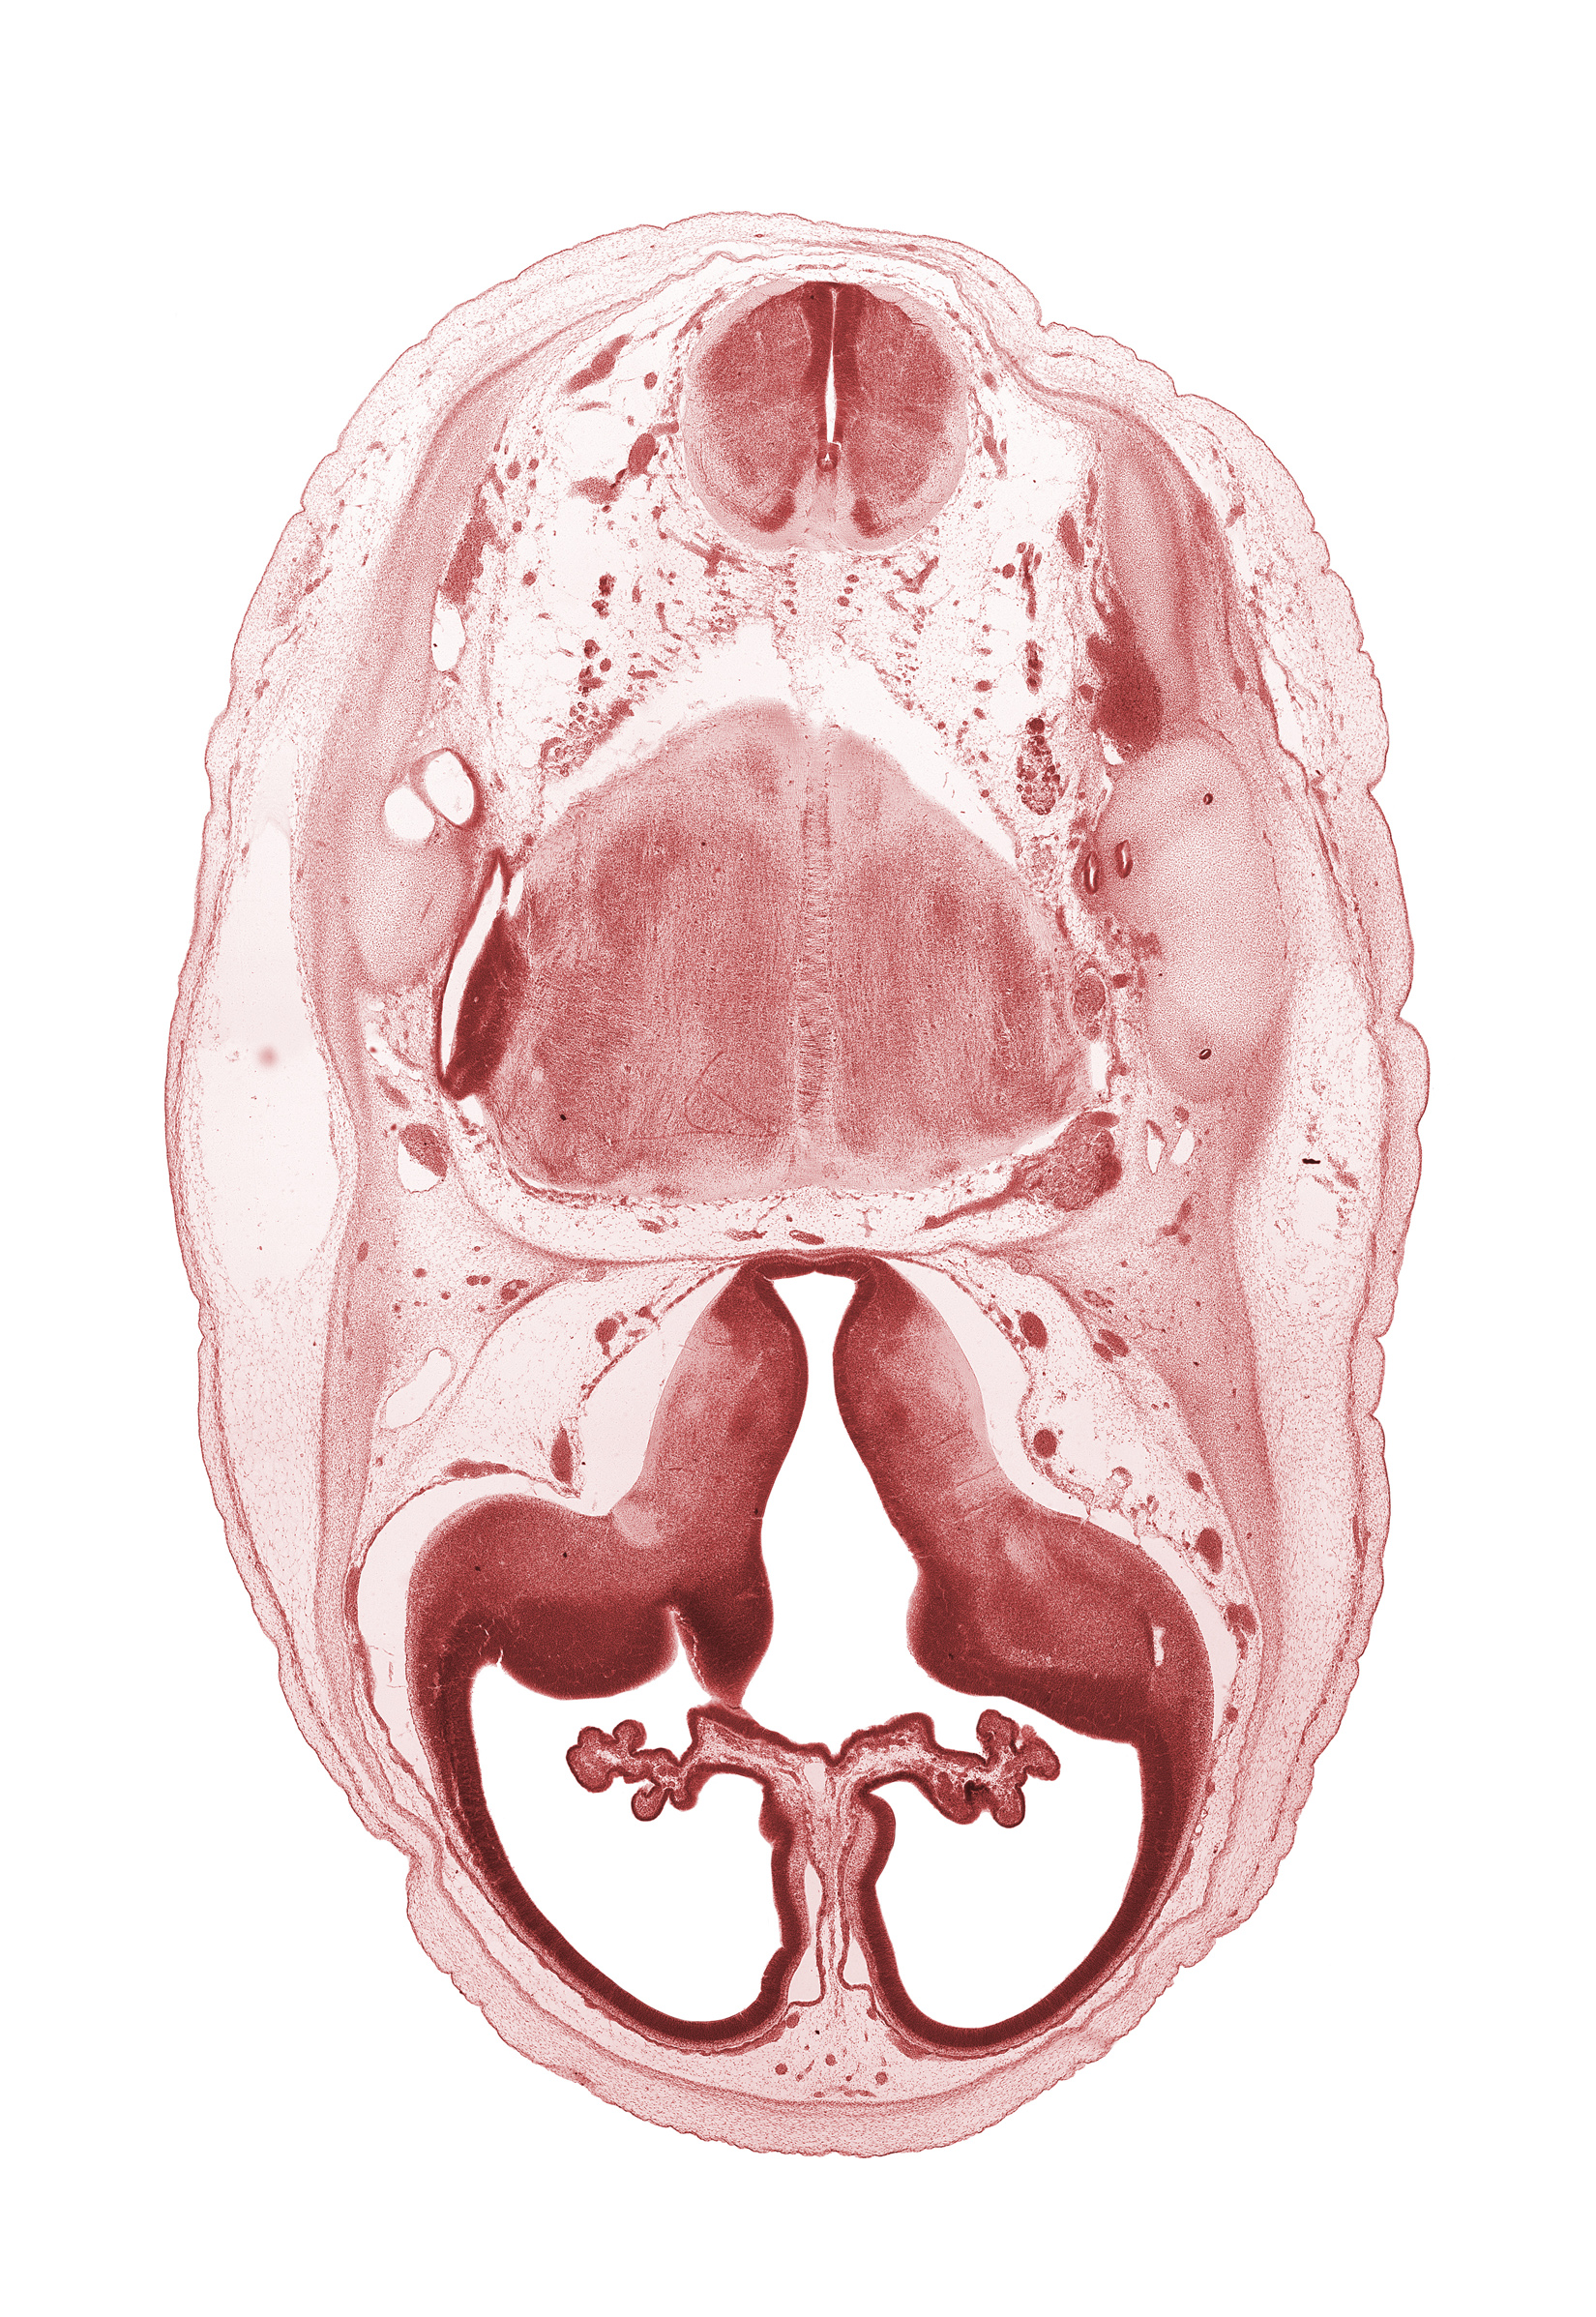 artifact separation(s), edge of lateral recess of rhombencoel (fourth ventricle), falx cerebri region, hypothalamic sulcus, internal carotid artery, interventricular foramen, lateral recess of rhombencoel (fourth ventricle), lateral ventricular eminence (telencephalon), medial ventricular eminence (diencephalon), myelencephalon (medulla oblongata), pons region (metencephalon), pyramidal tract region, root of accessory nerve (CN XI), root of glossopharyngeal nerve (CN IX), sigmoid sinus, vagus nerve (CN X)